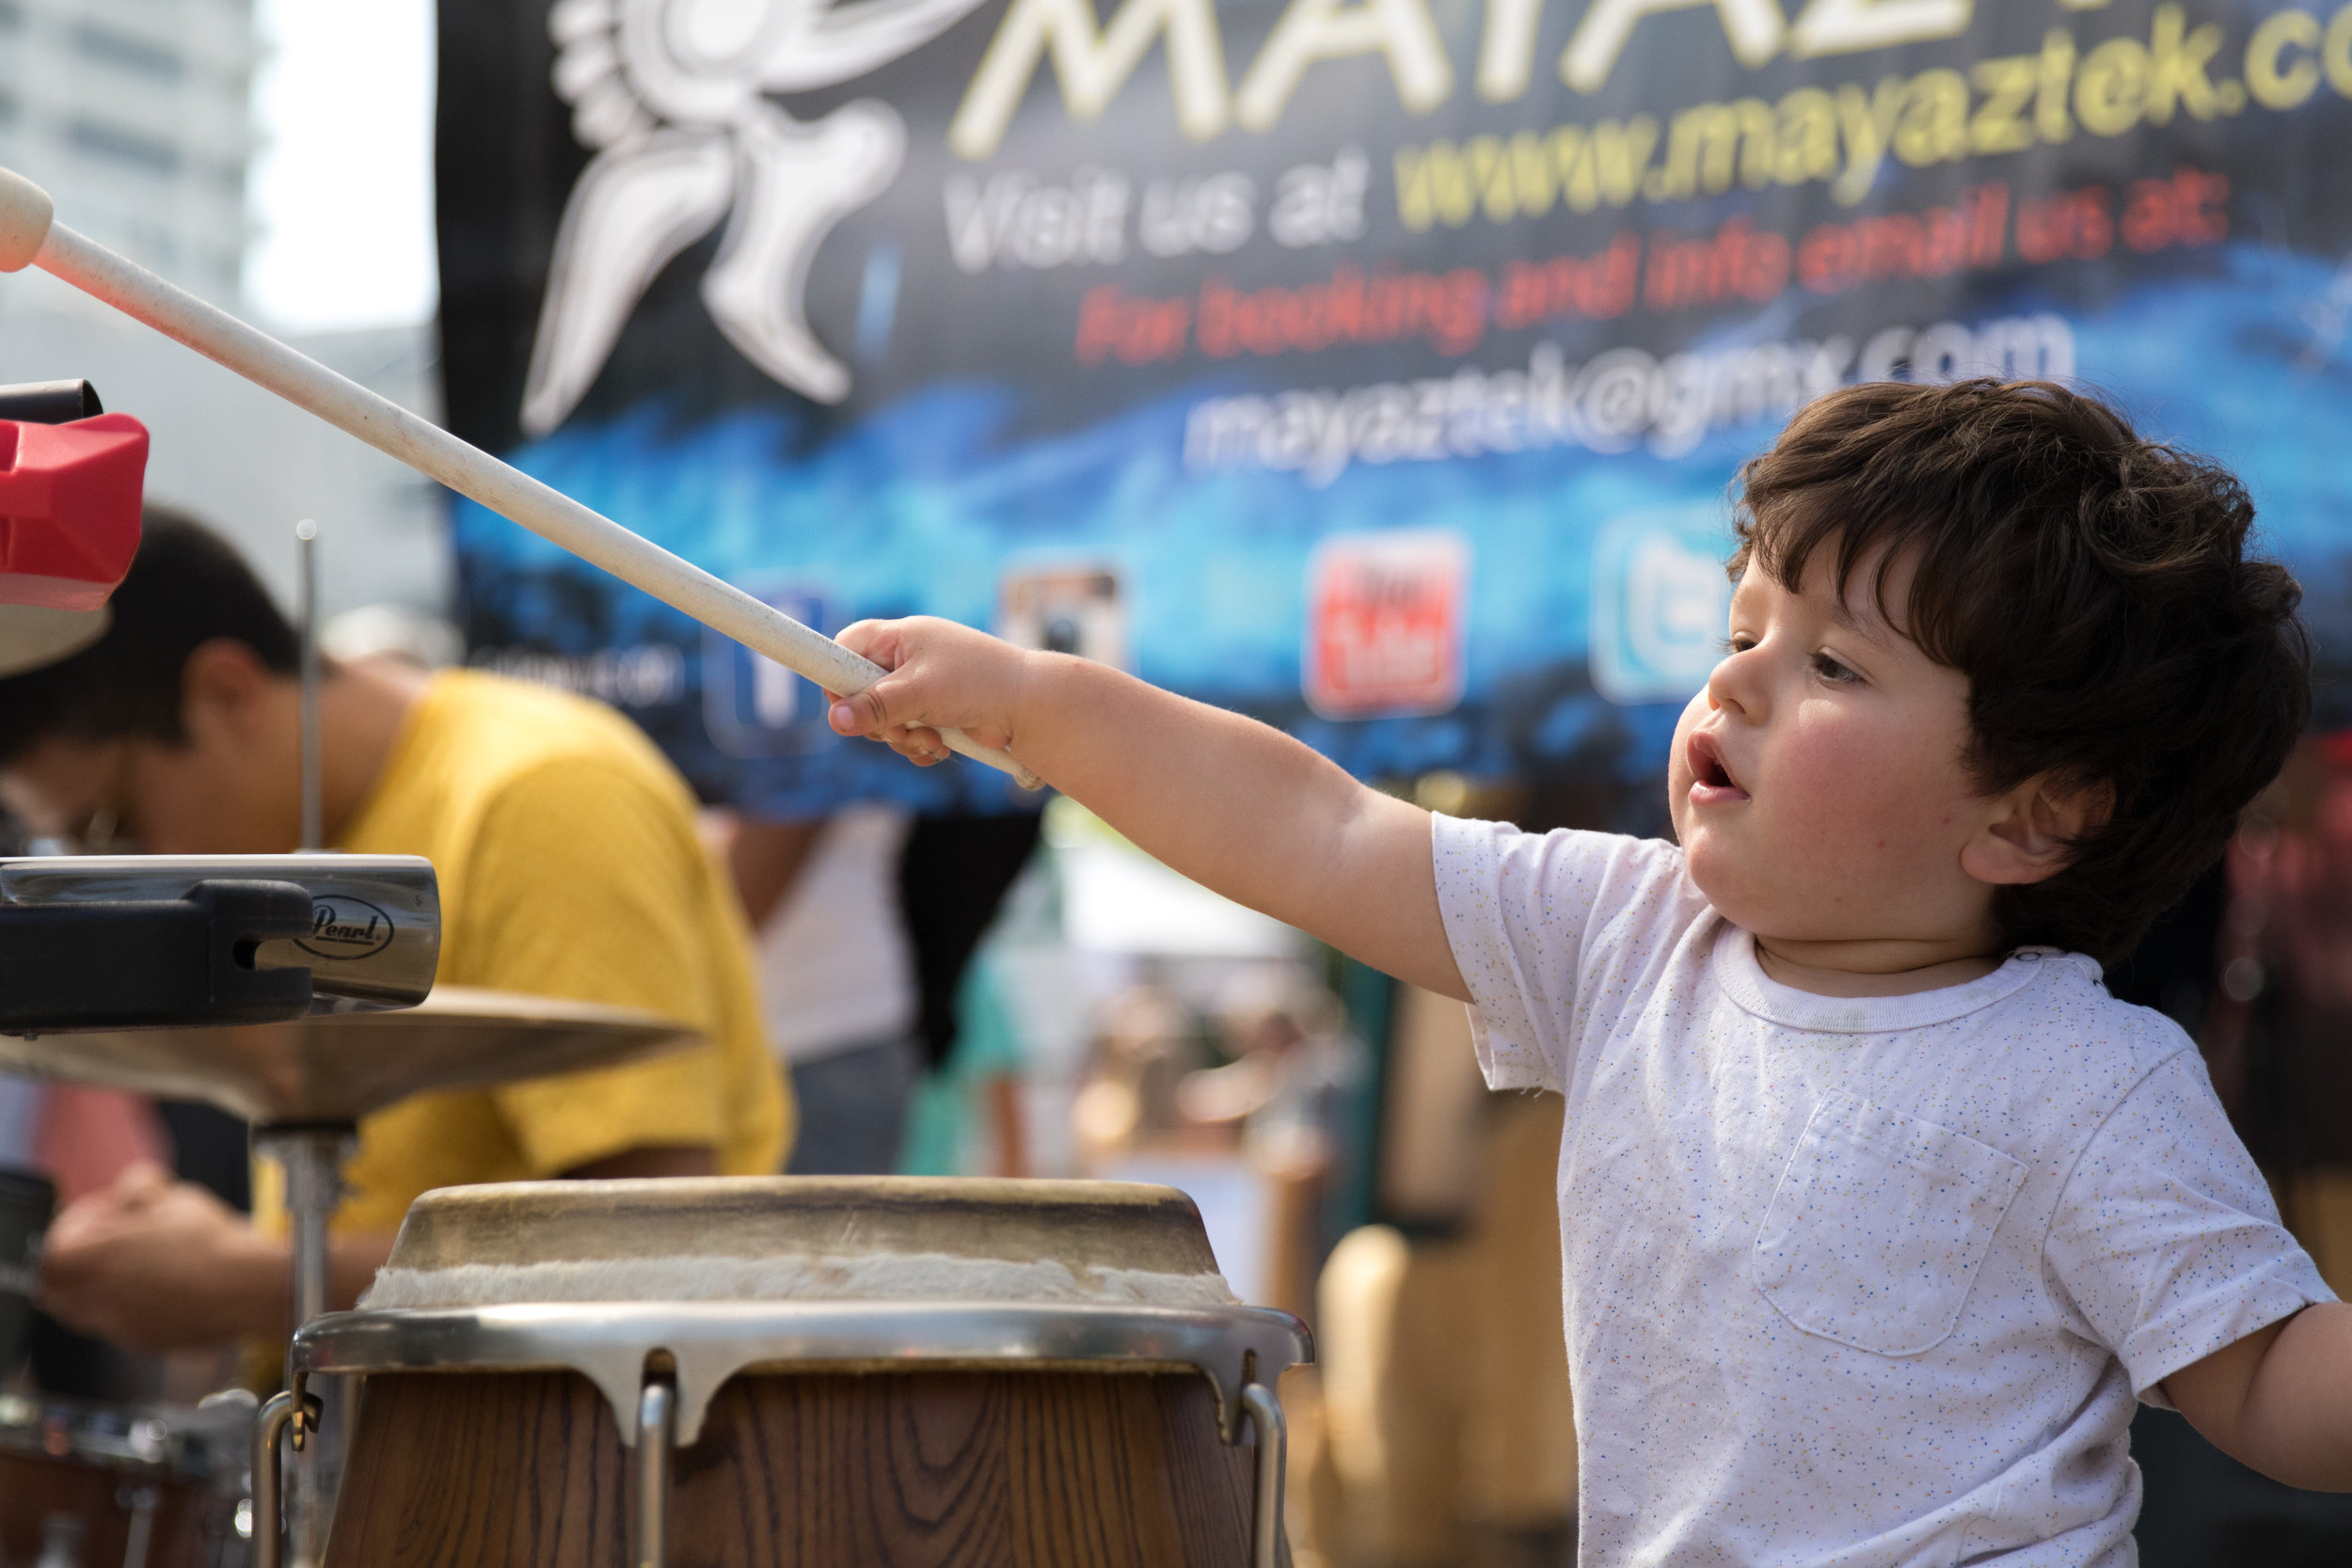  Ofeck Sharon tries to play the drums after the performance of "Mayaztek". Their performance was one of many at the City of Santa Monica's Open Streets Festival (COAST) which took place on October 1, 2017. (Photo By: Zane Meyer-Thornton) 